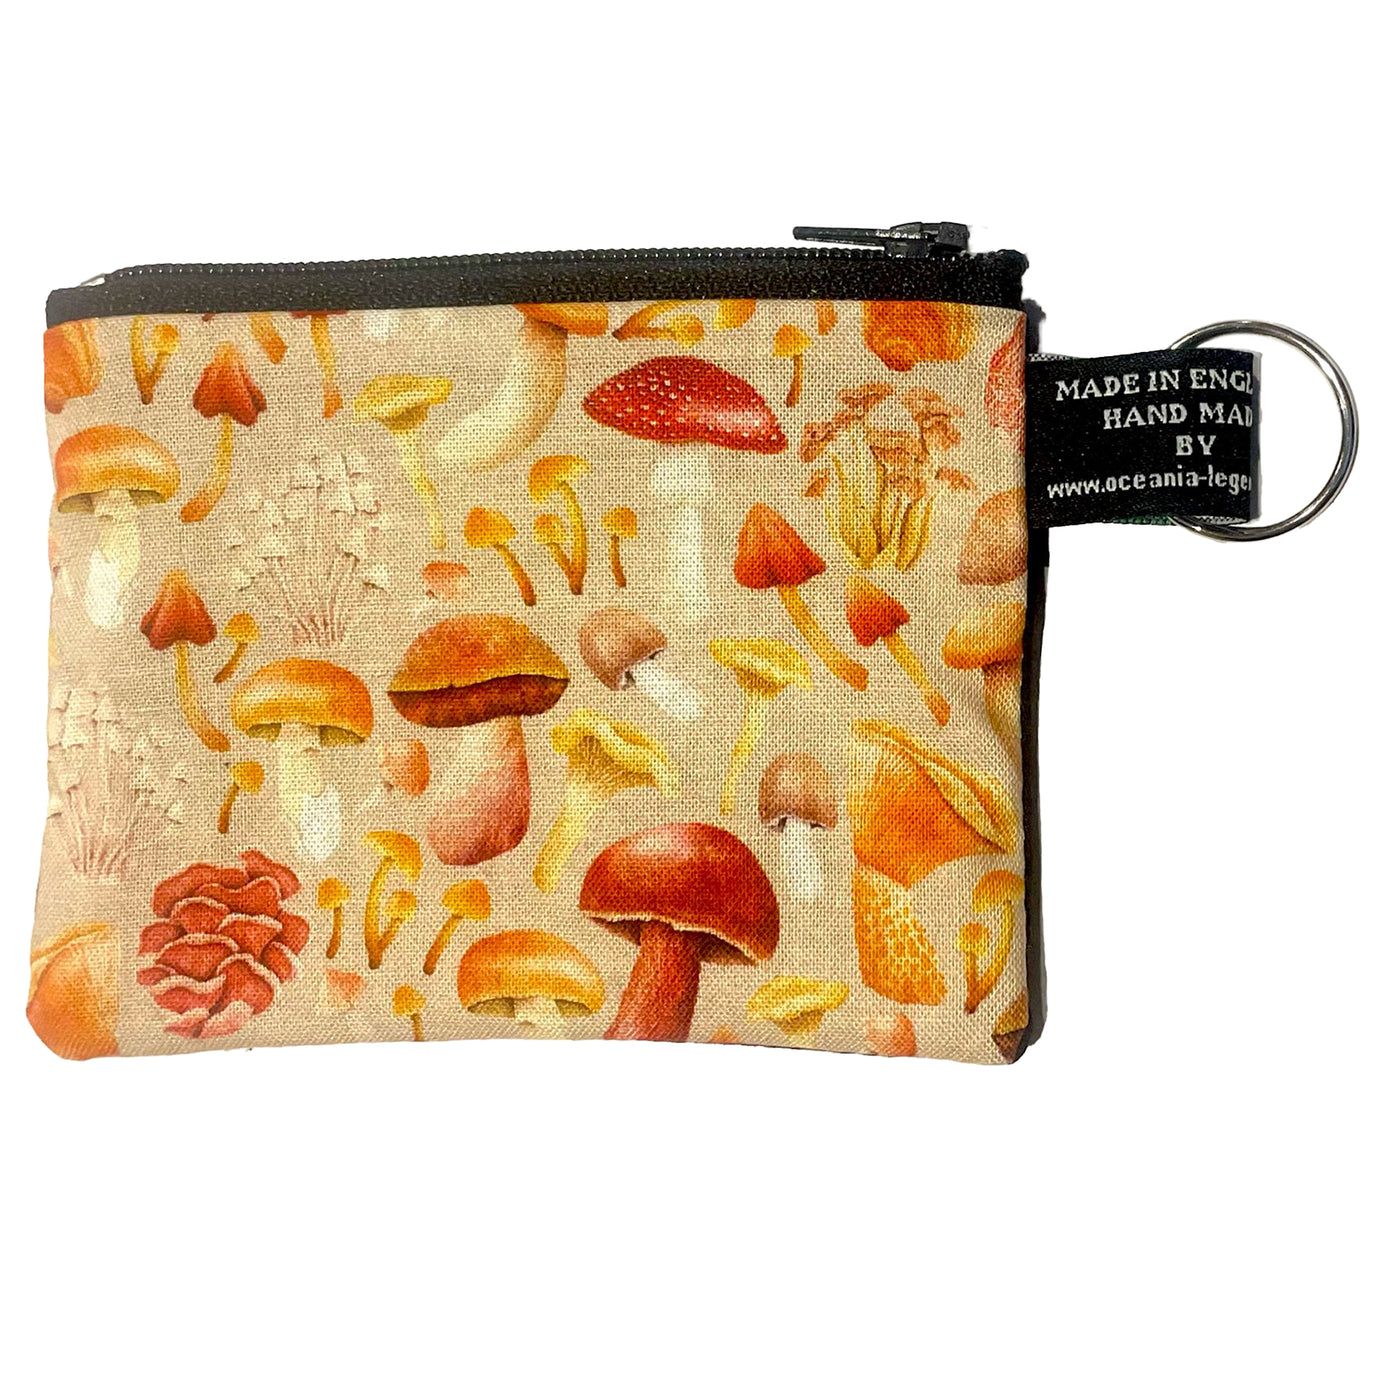 Mushrooms & toadstool design in autumnal colours on our zipped cotton purse handmade